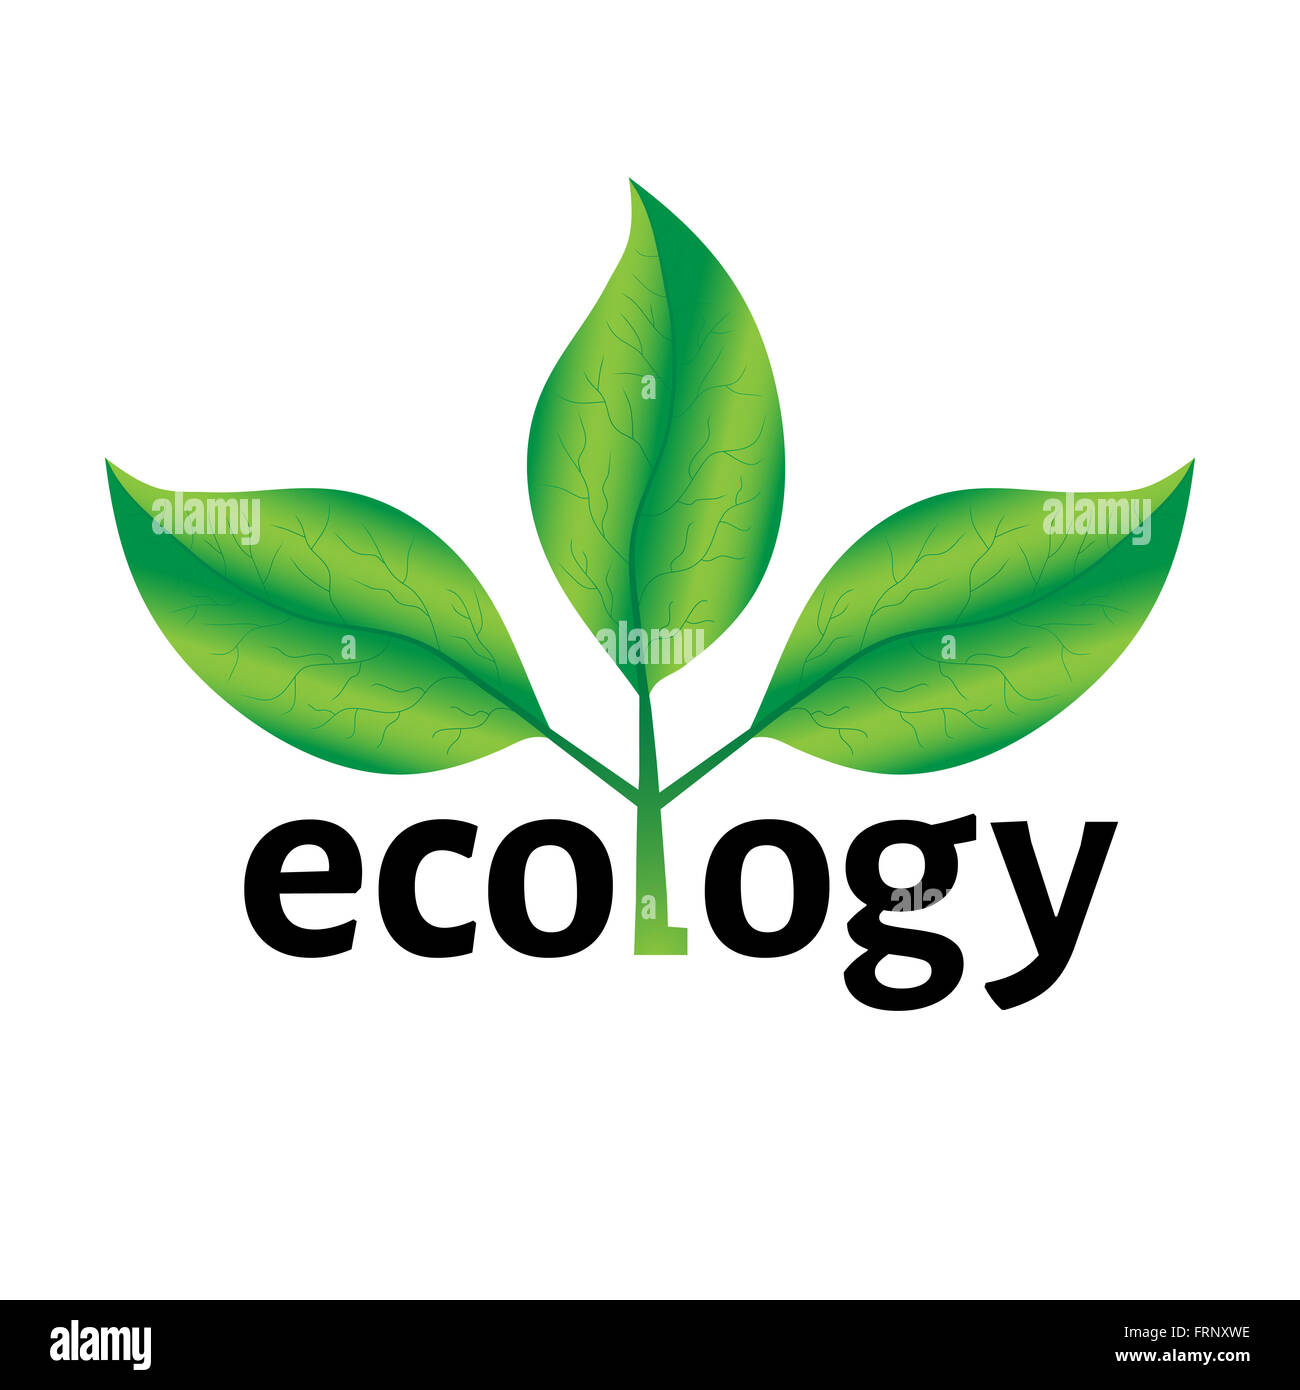 Ecological or environmental concept or logo. Green leaves on a tree with ecology text on a white background. Stock Photo